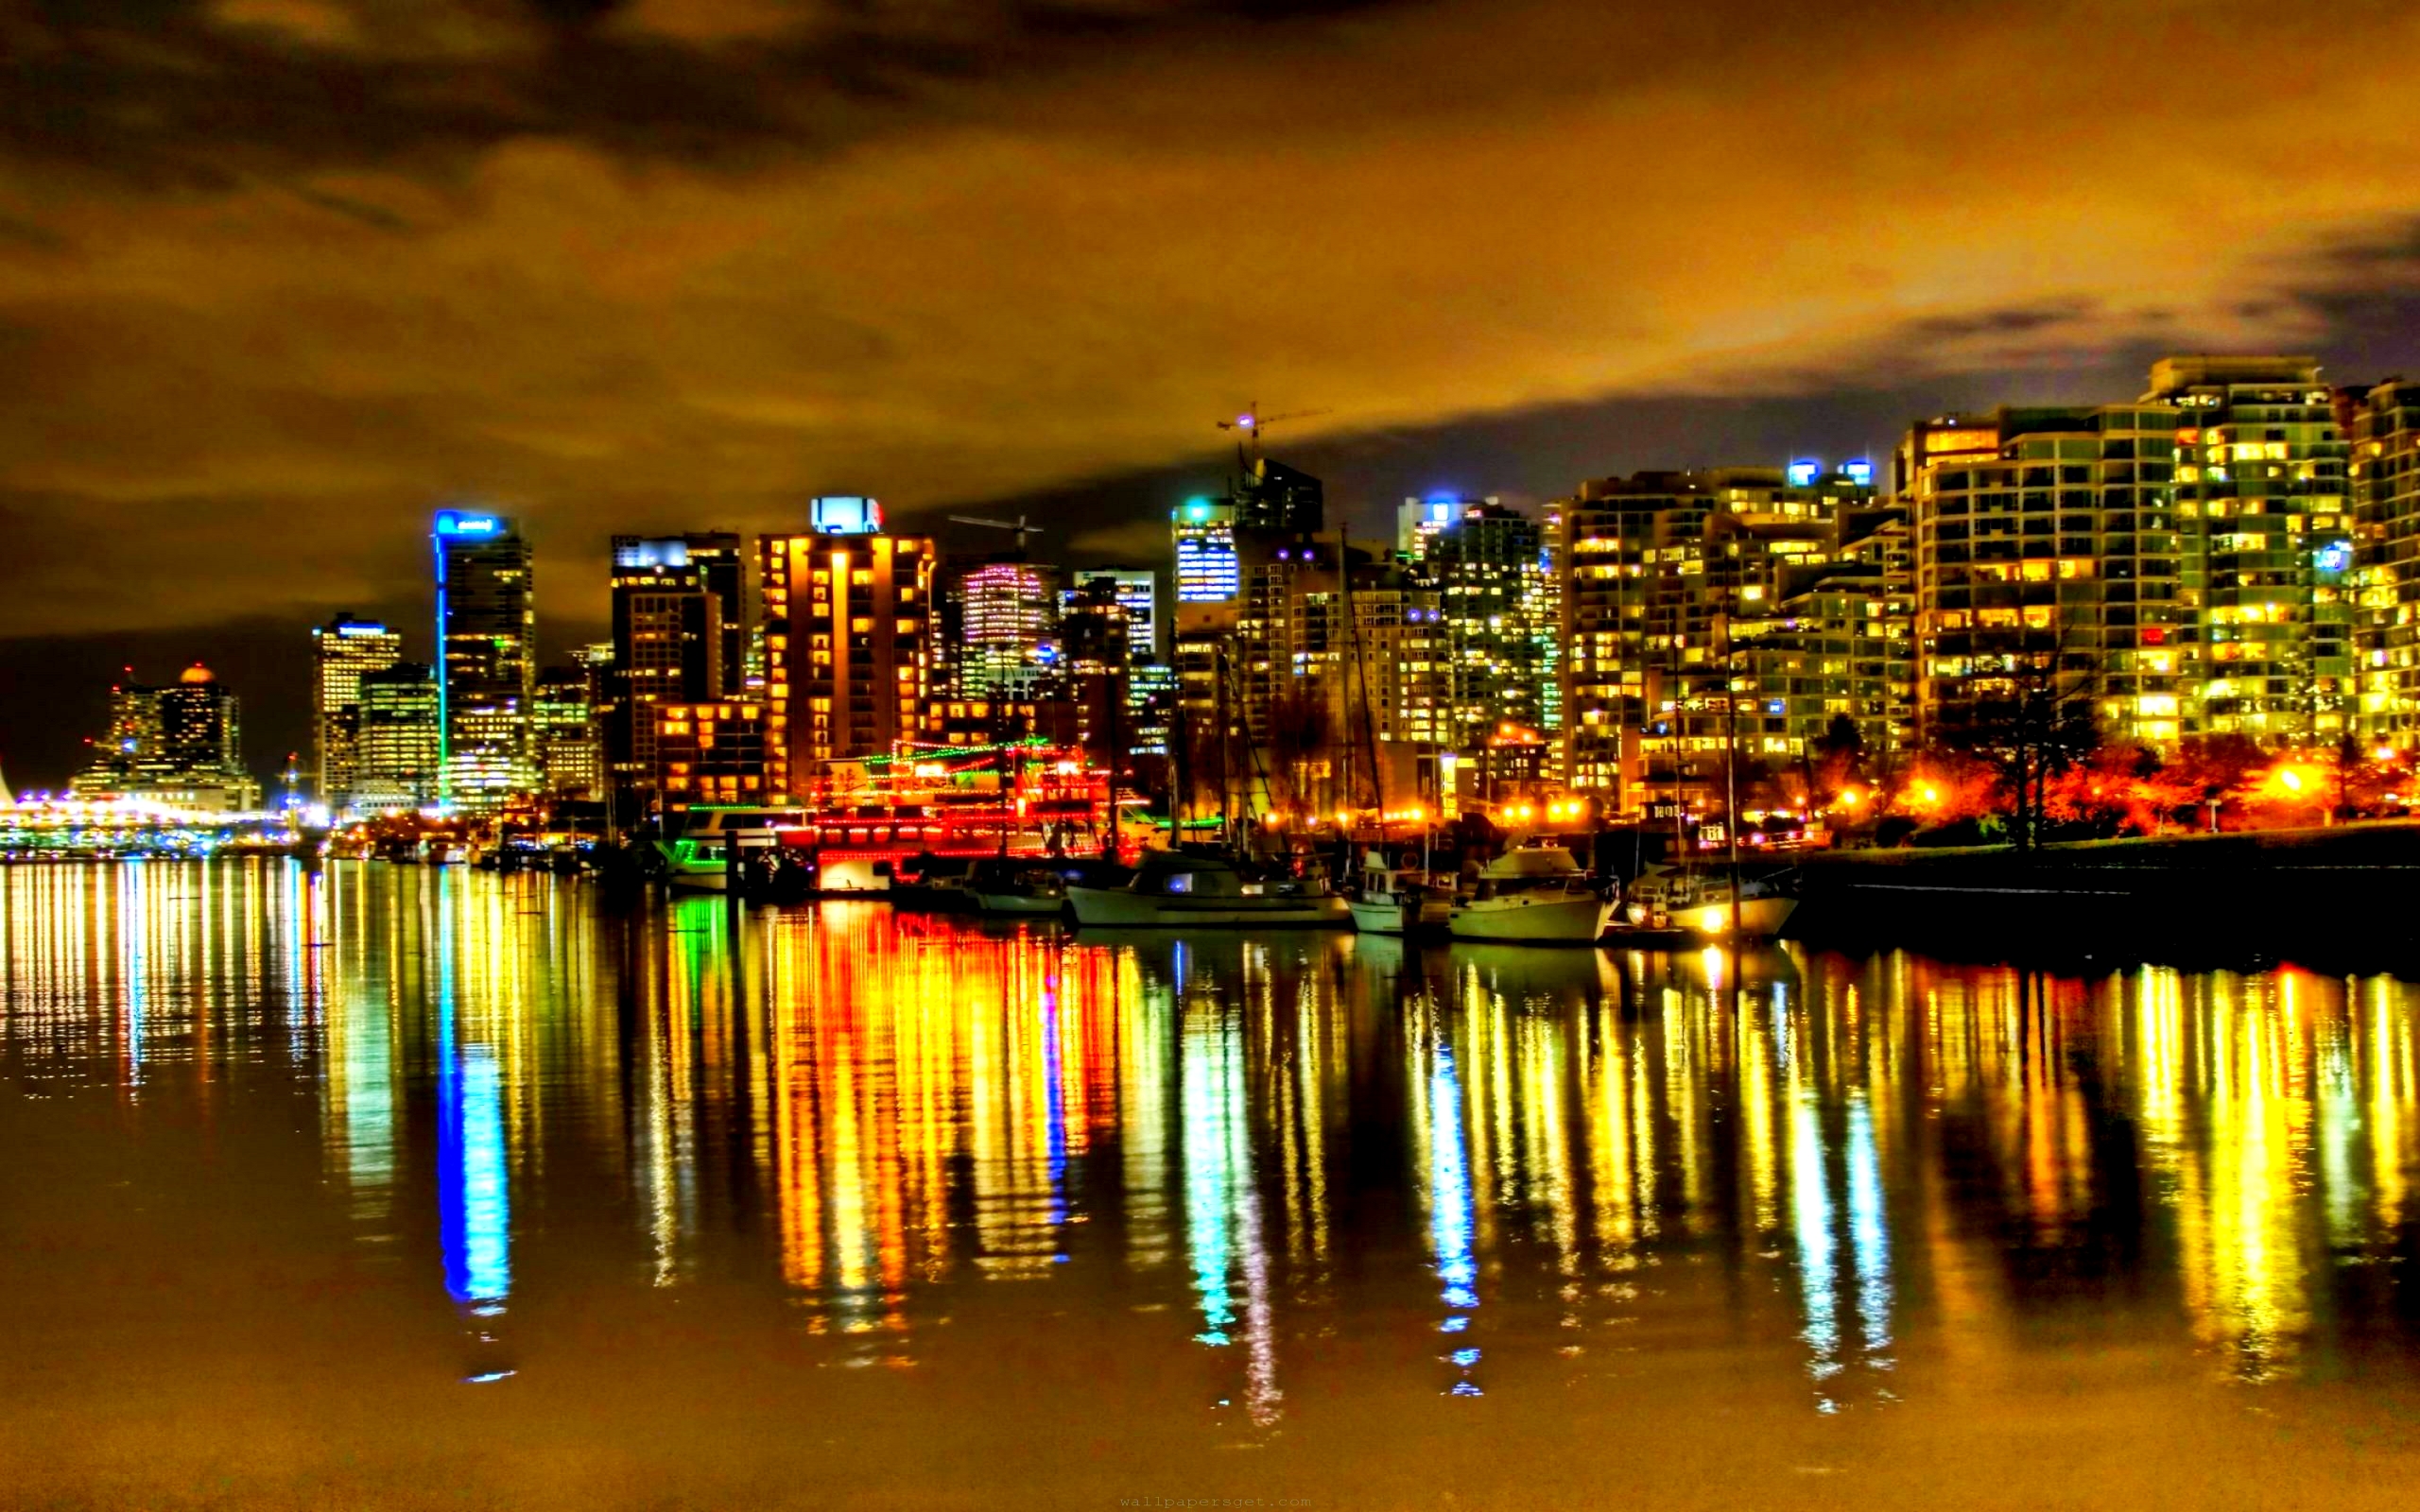 Beautiful city lights in the night 2K wallpaper download